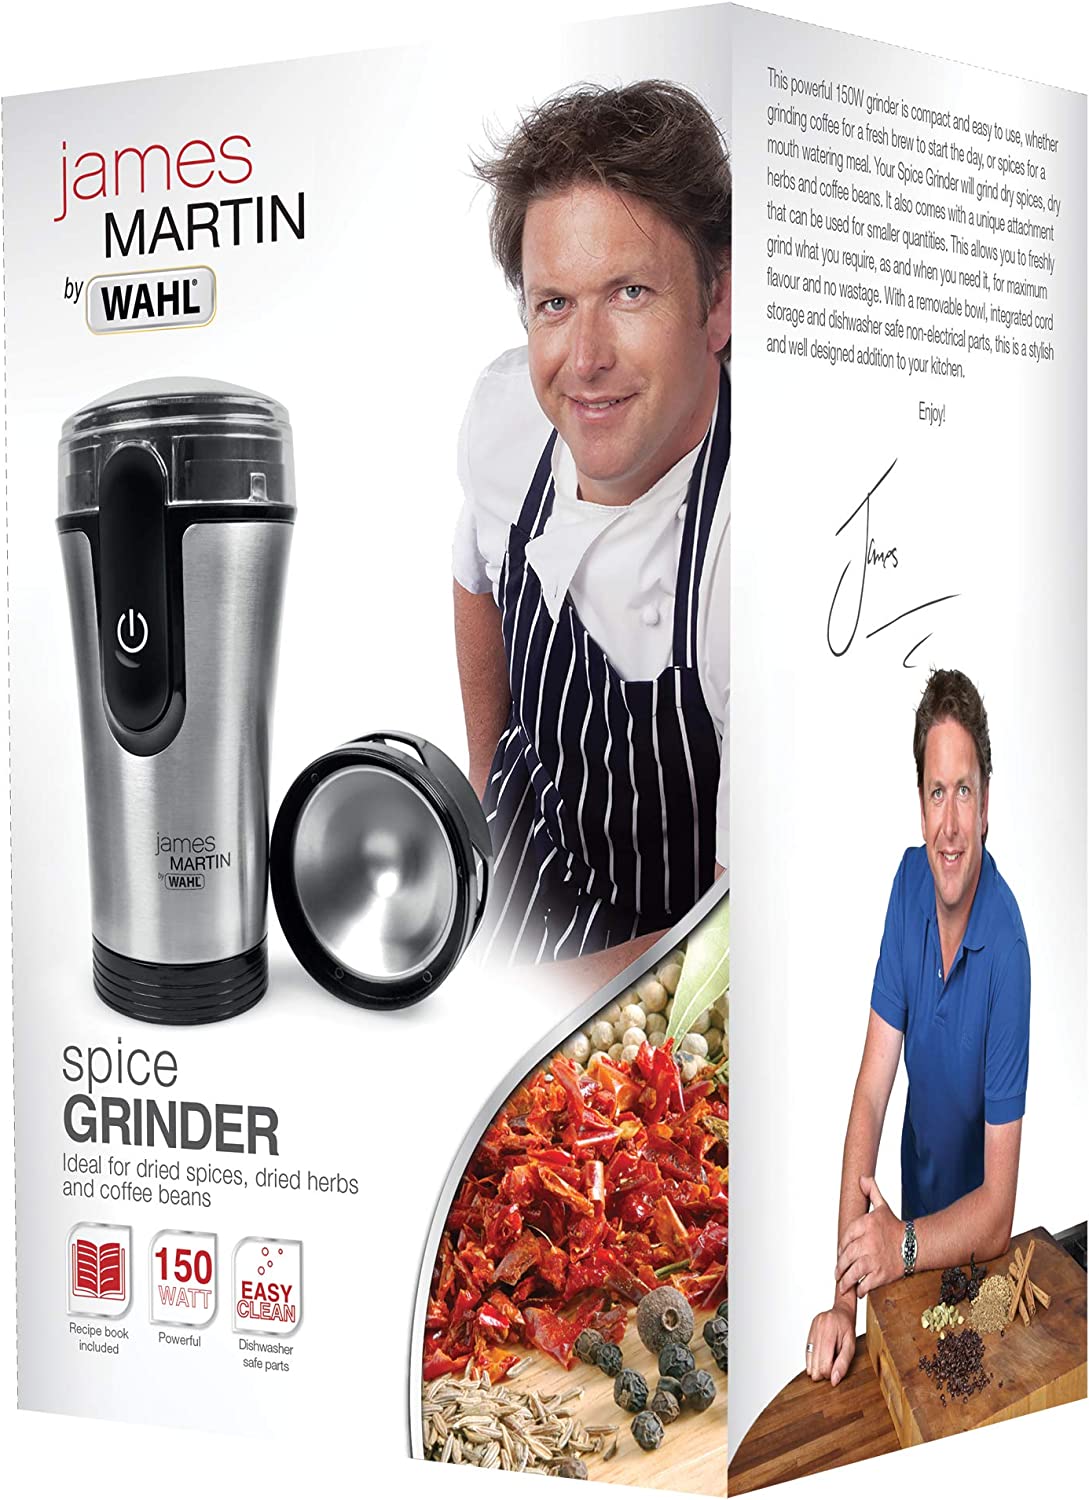 Electric Black Wahl James Martin Bean Coffee Grinder Stainless Steel (ZX992)